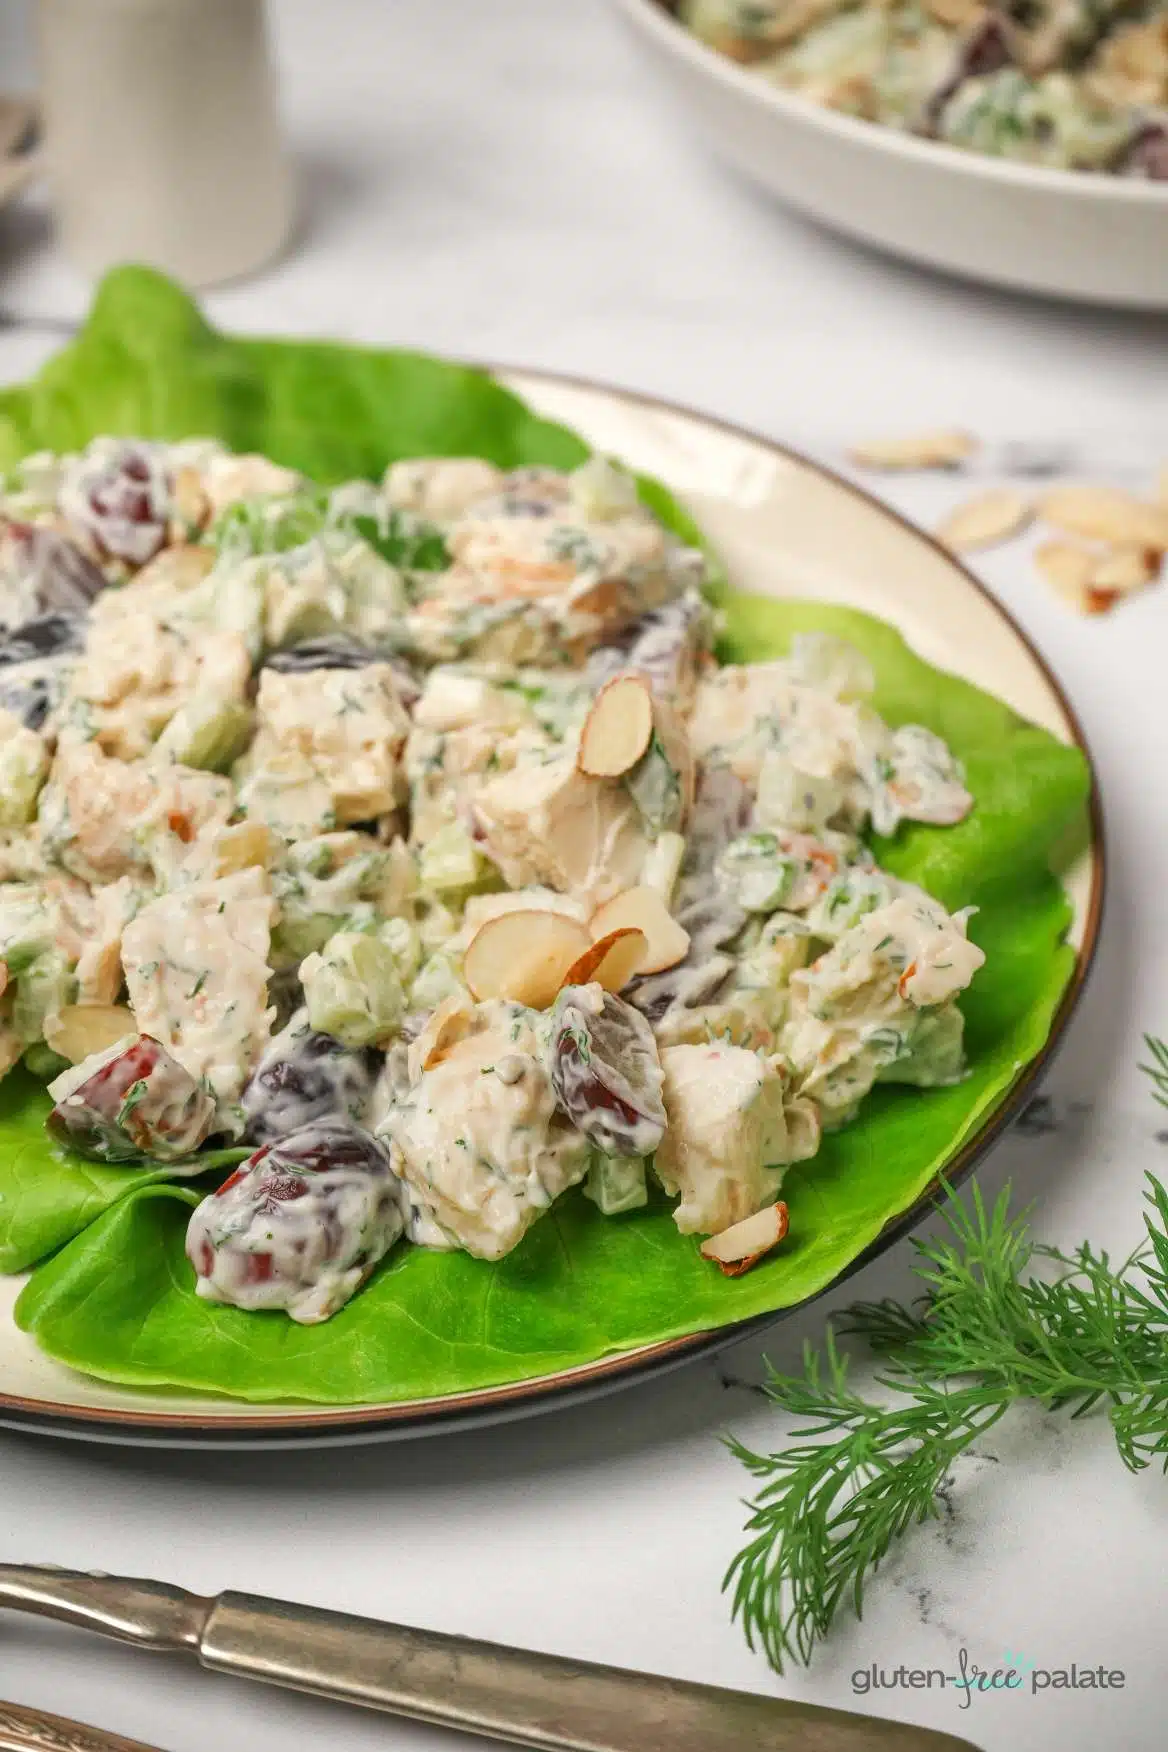 Gluten-free chicken salad on a lettuce leaf with a serving spoon.